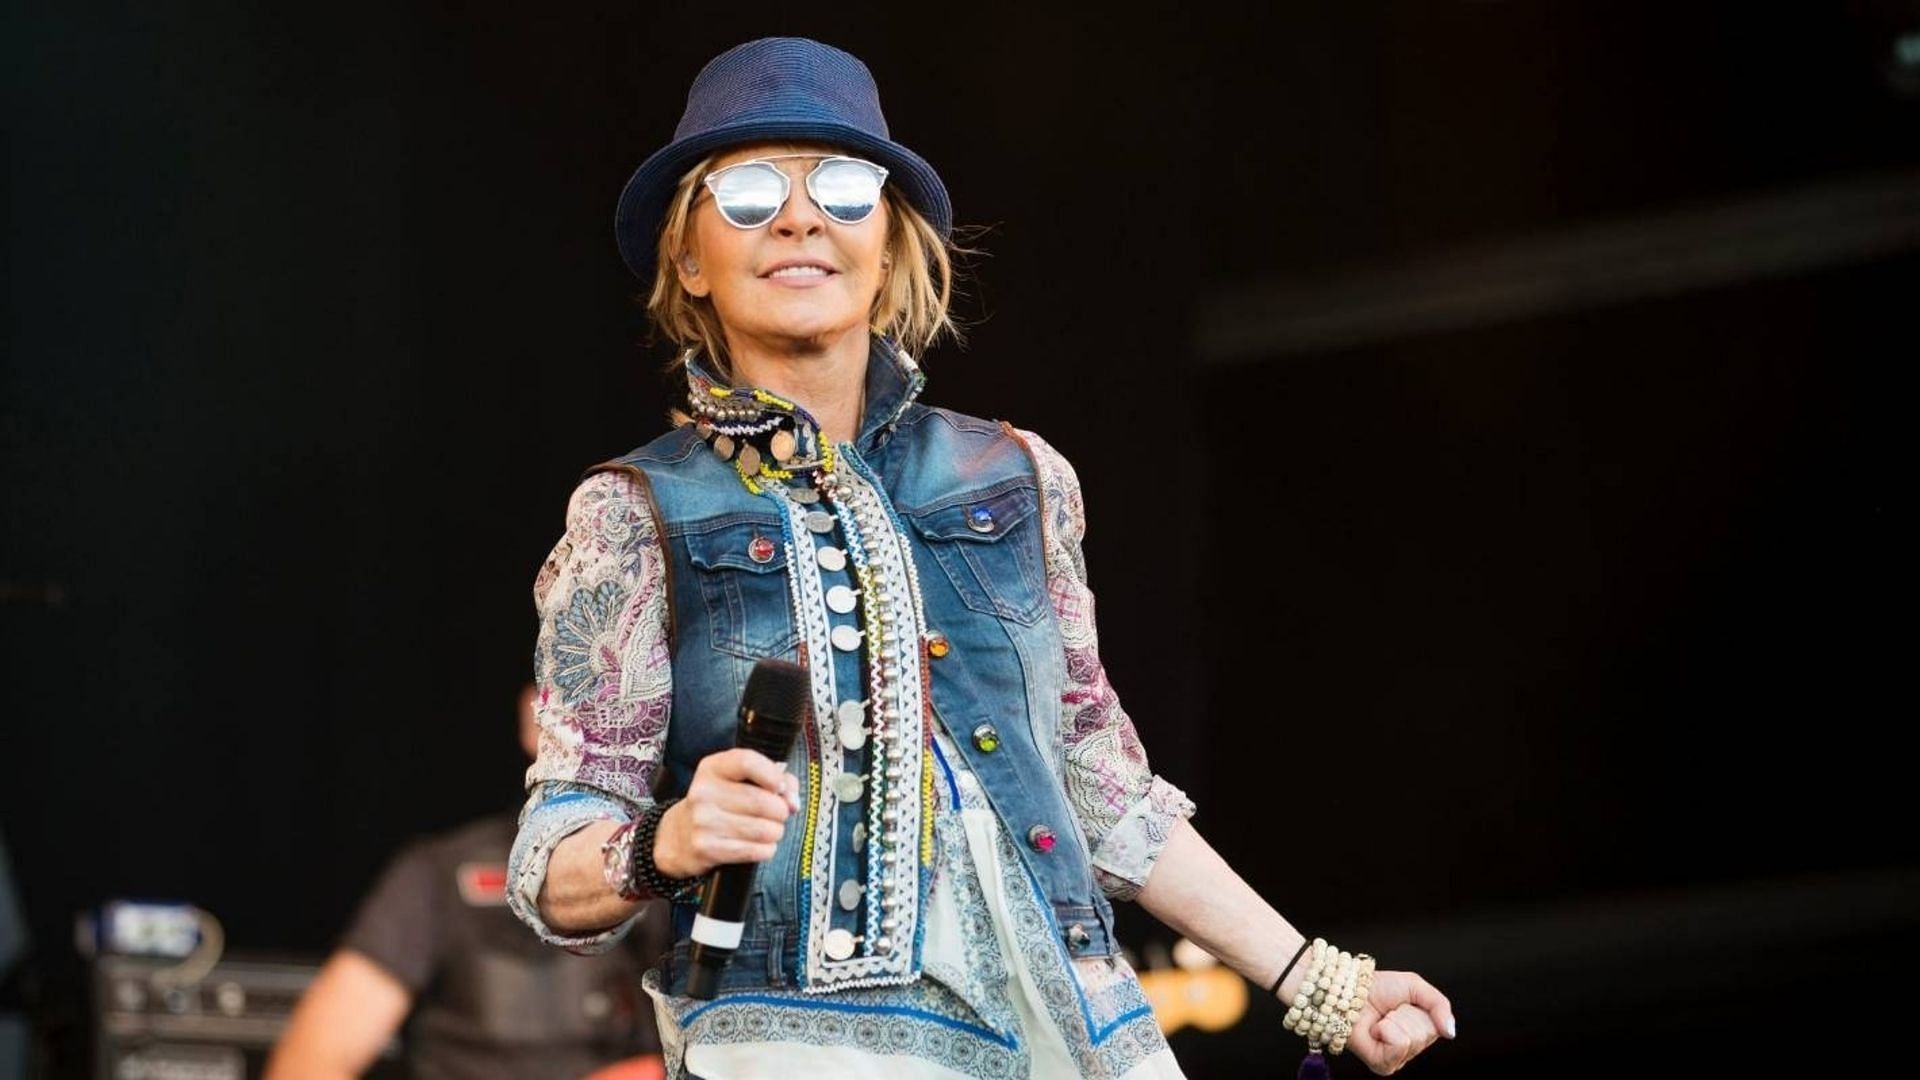 Lulu at the Wickerman festival in July 2015 (Image via Ross Gilmore/Getty Images)